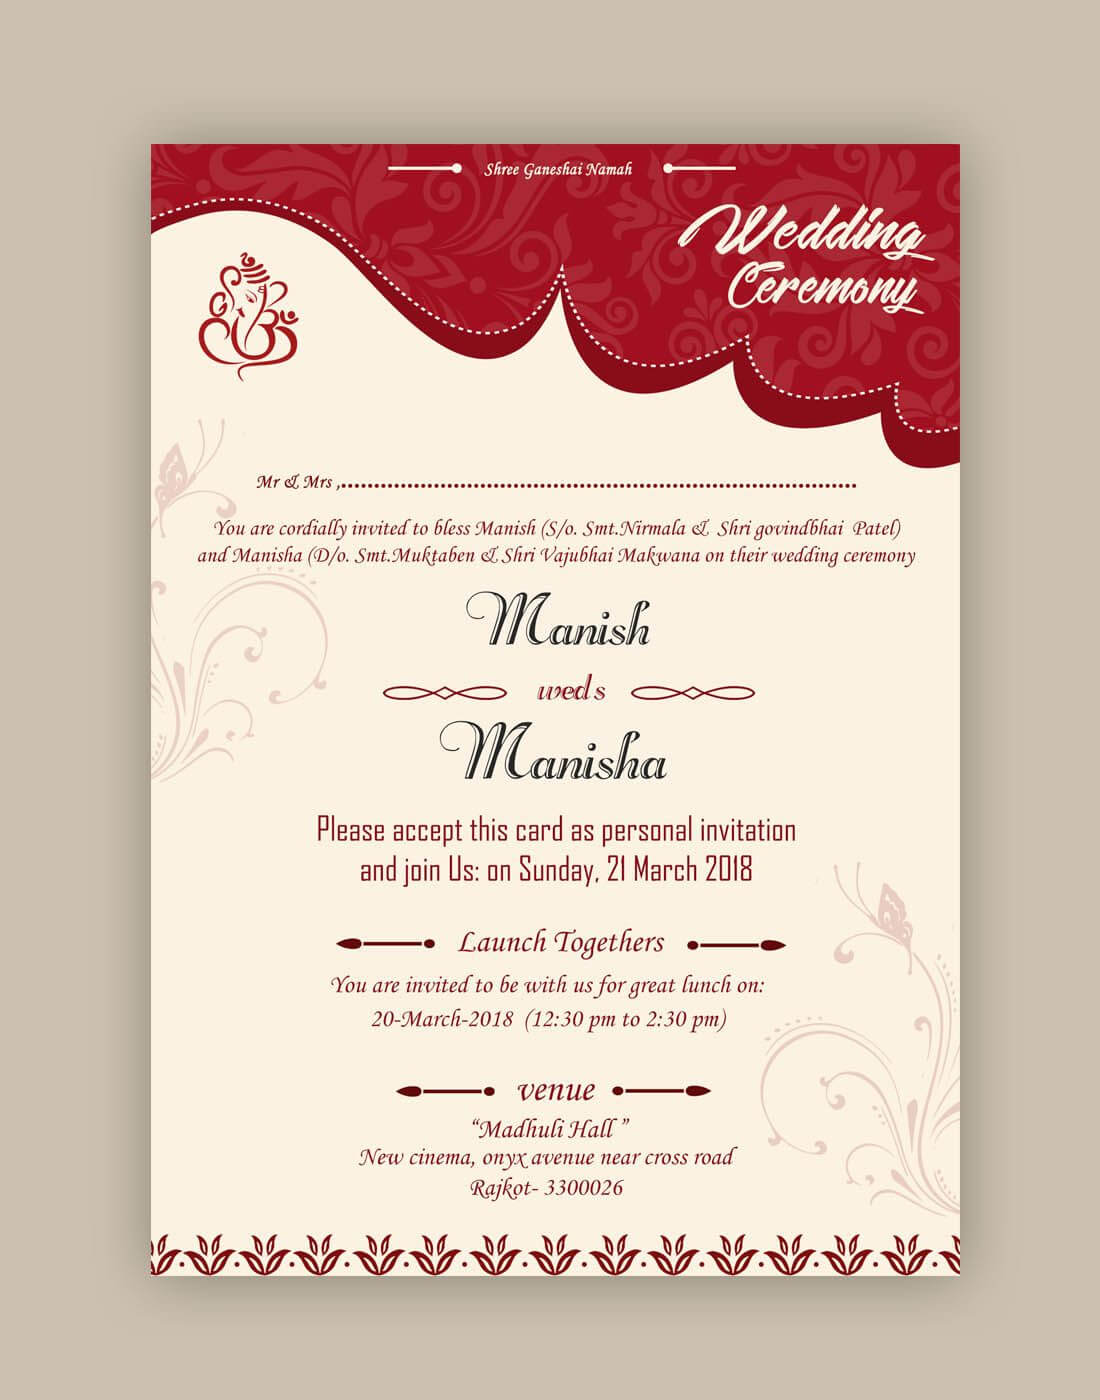 Free Wedding Card Psd Templates In 2019 | Free Wedding Cards In Indian Wedding Cards Design Templates